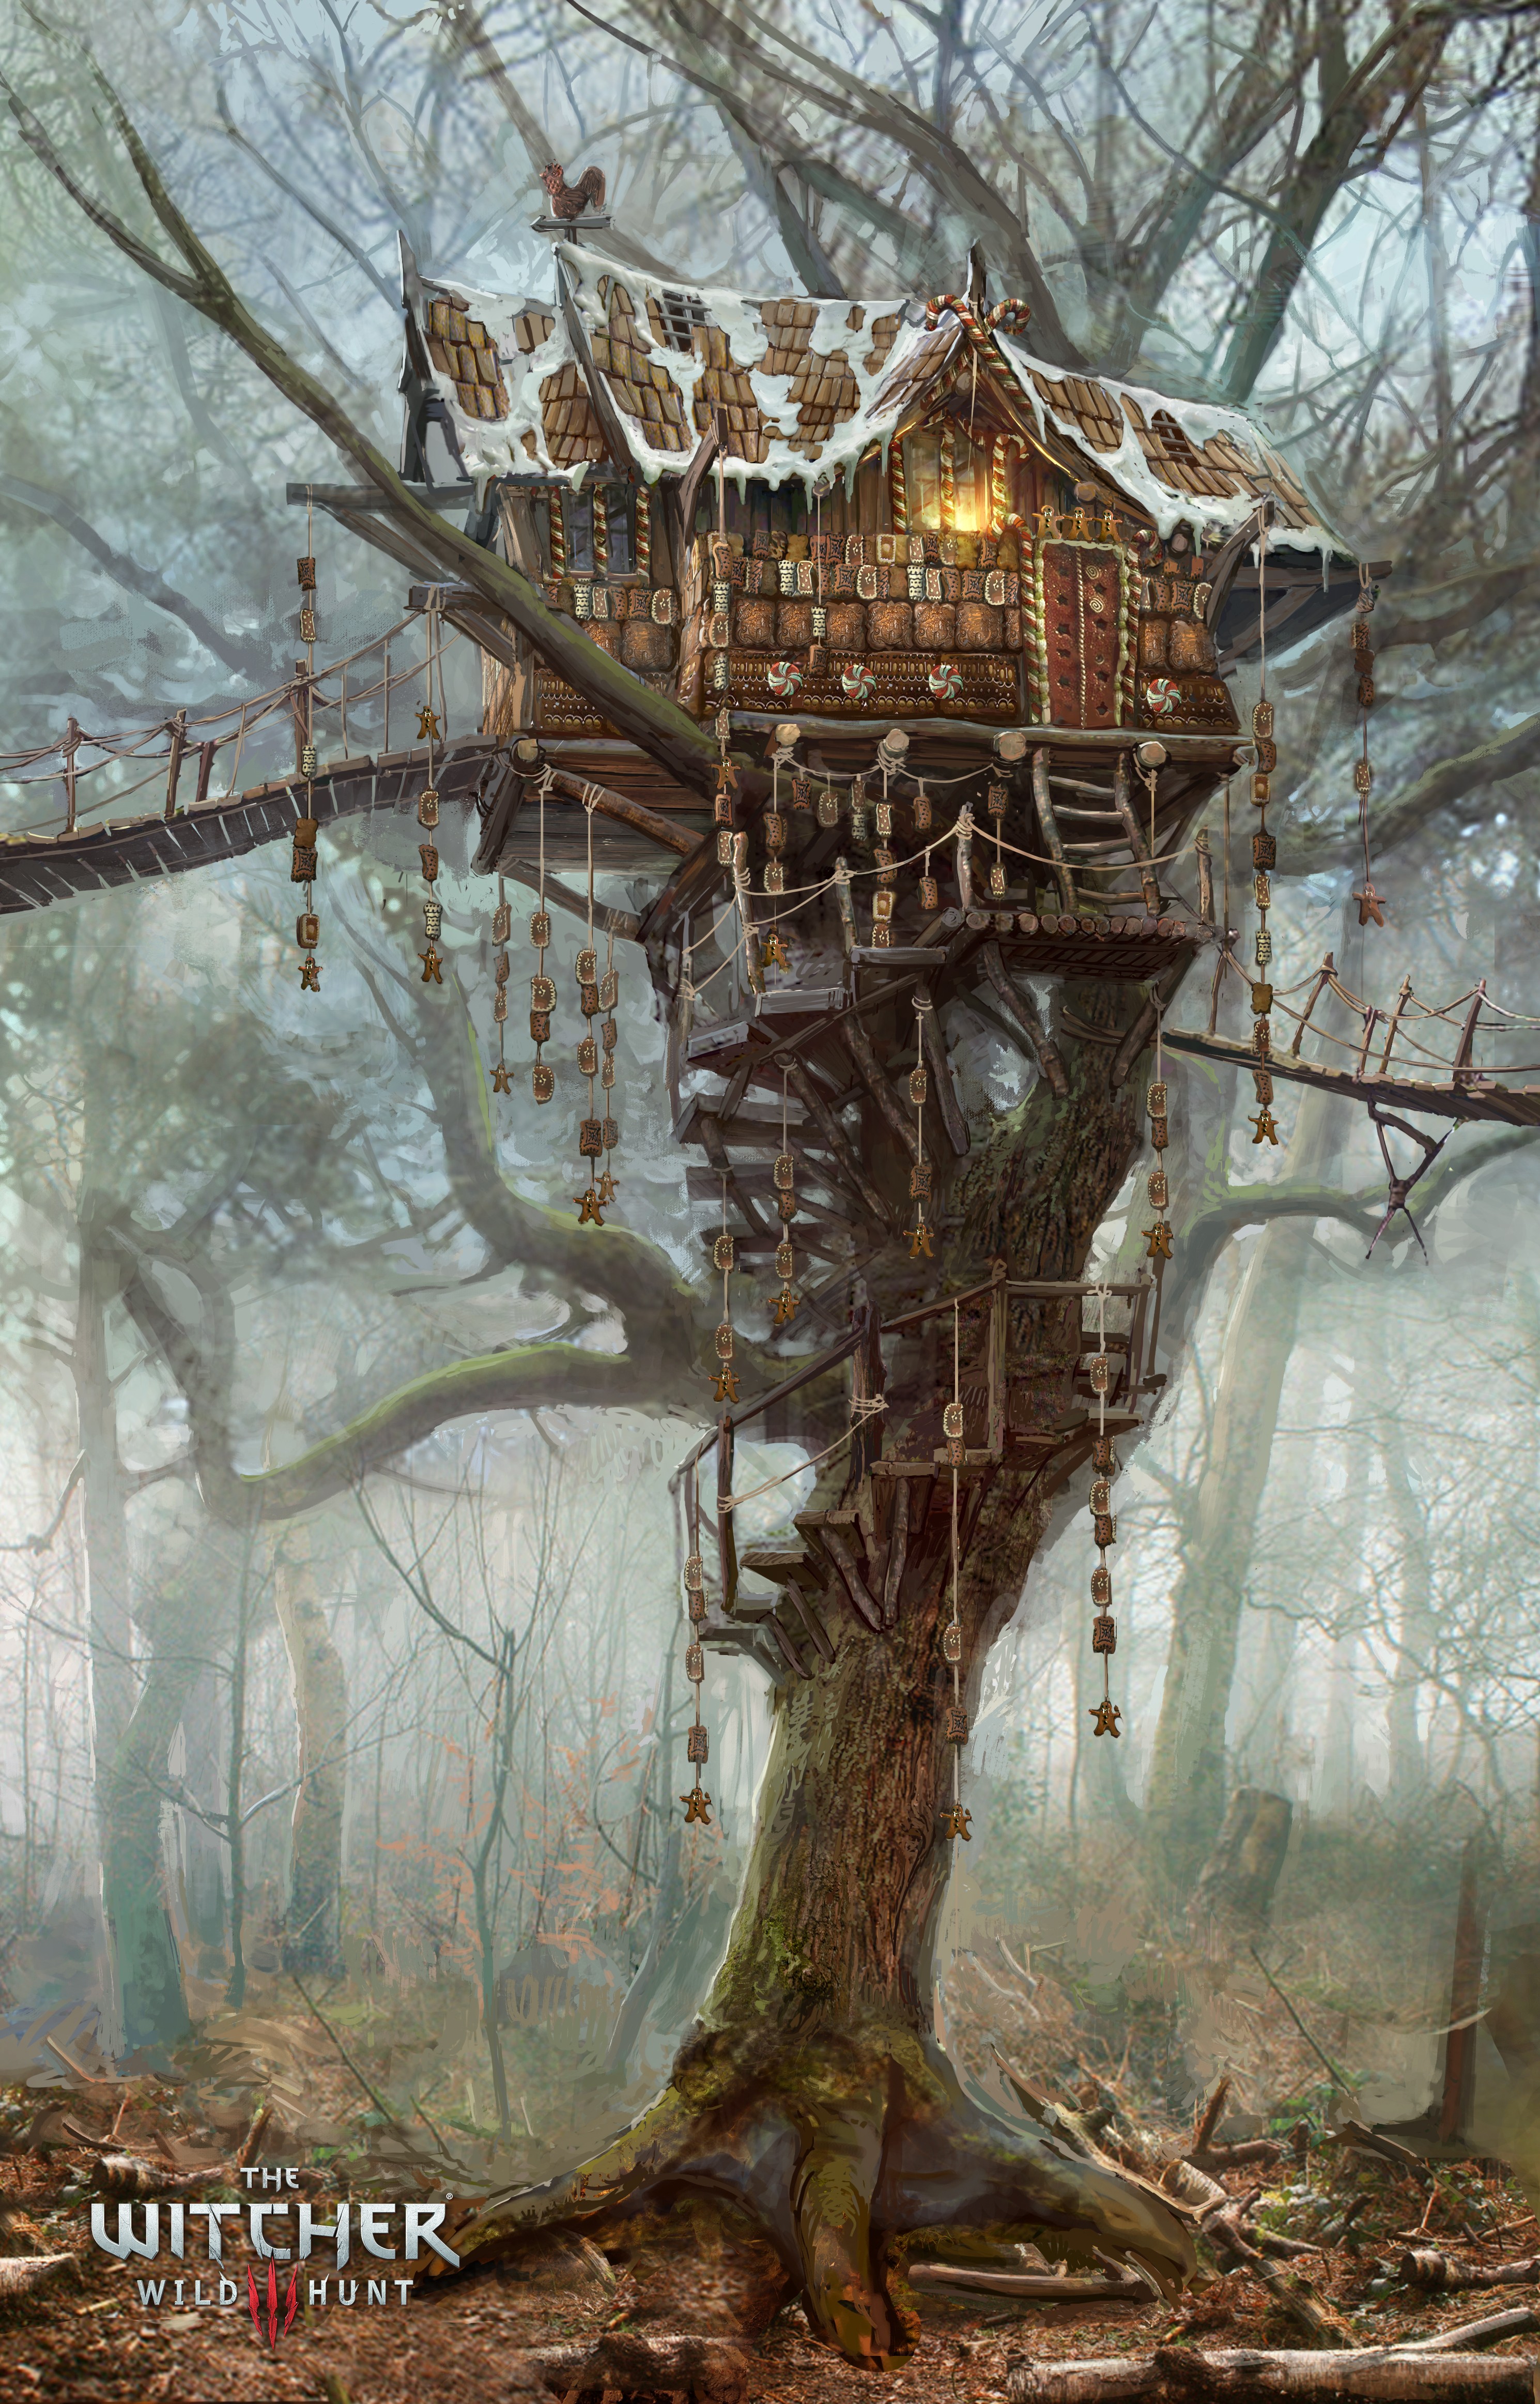 General 2980x4651 The Witcher 3: Wild Hunt video games fantasy art tree house trees video game art RPG PC gaming